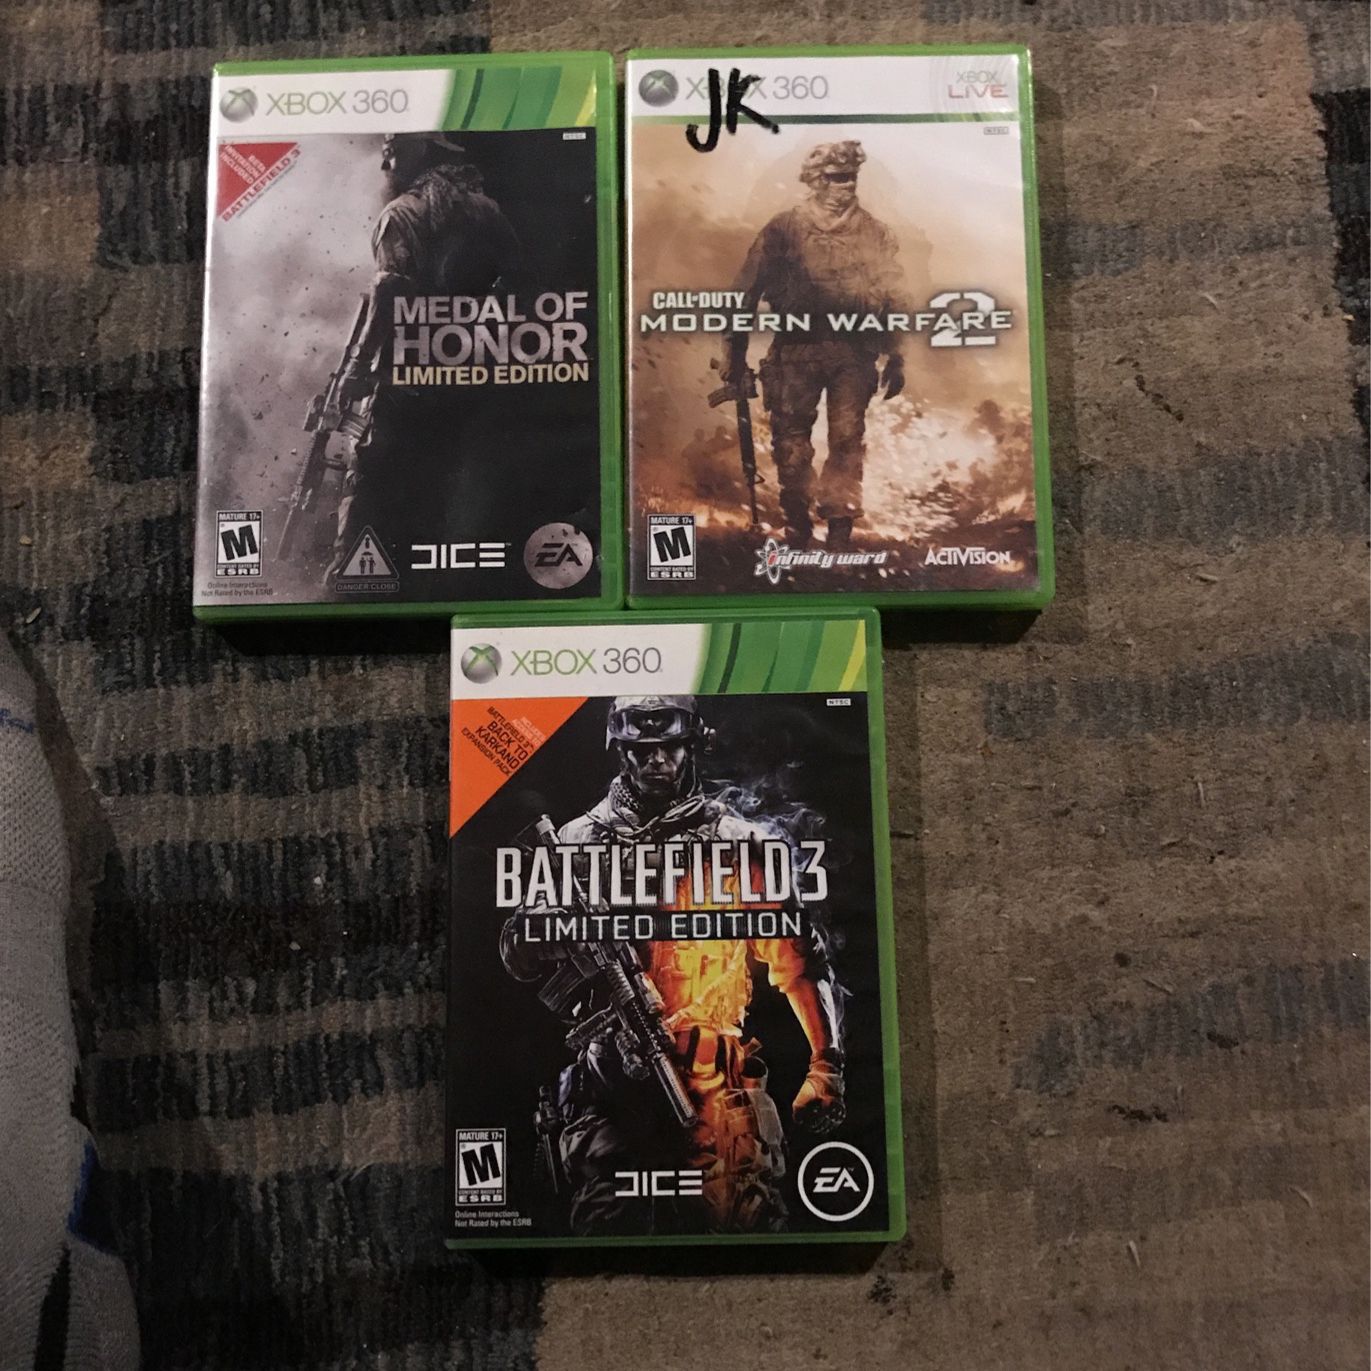 Xbox 360 Games All Three For $30 Medal Of Honor Limited Edition  Call-duty Modern Warfare 2 Battlefield 3 Limited Edition 